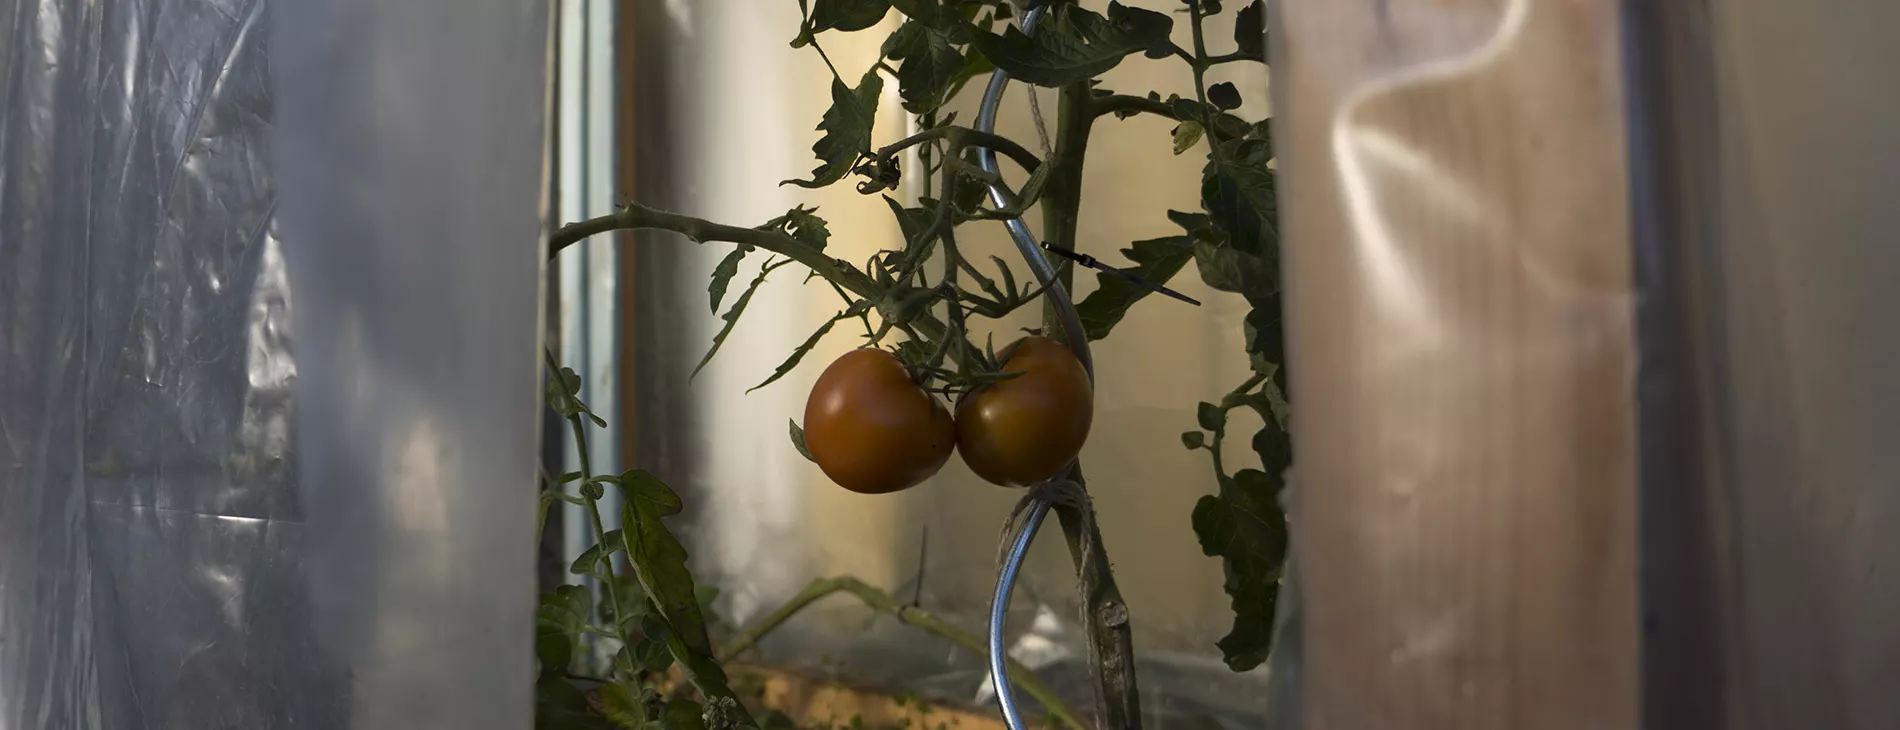 2 nearly ripe tomatoes in a small tomato green house